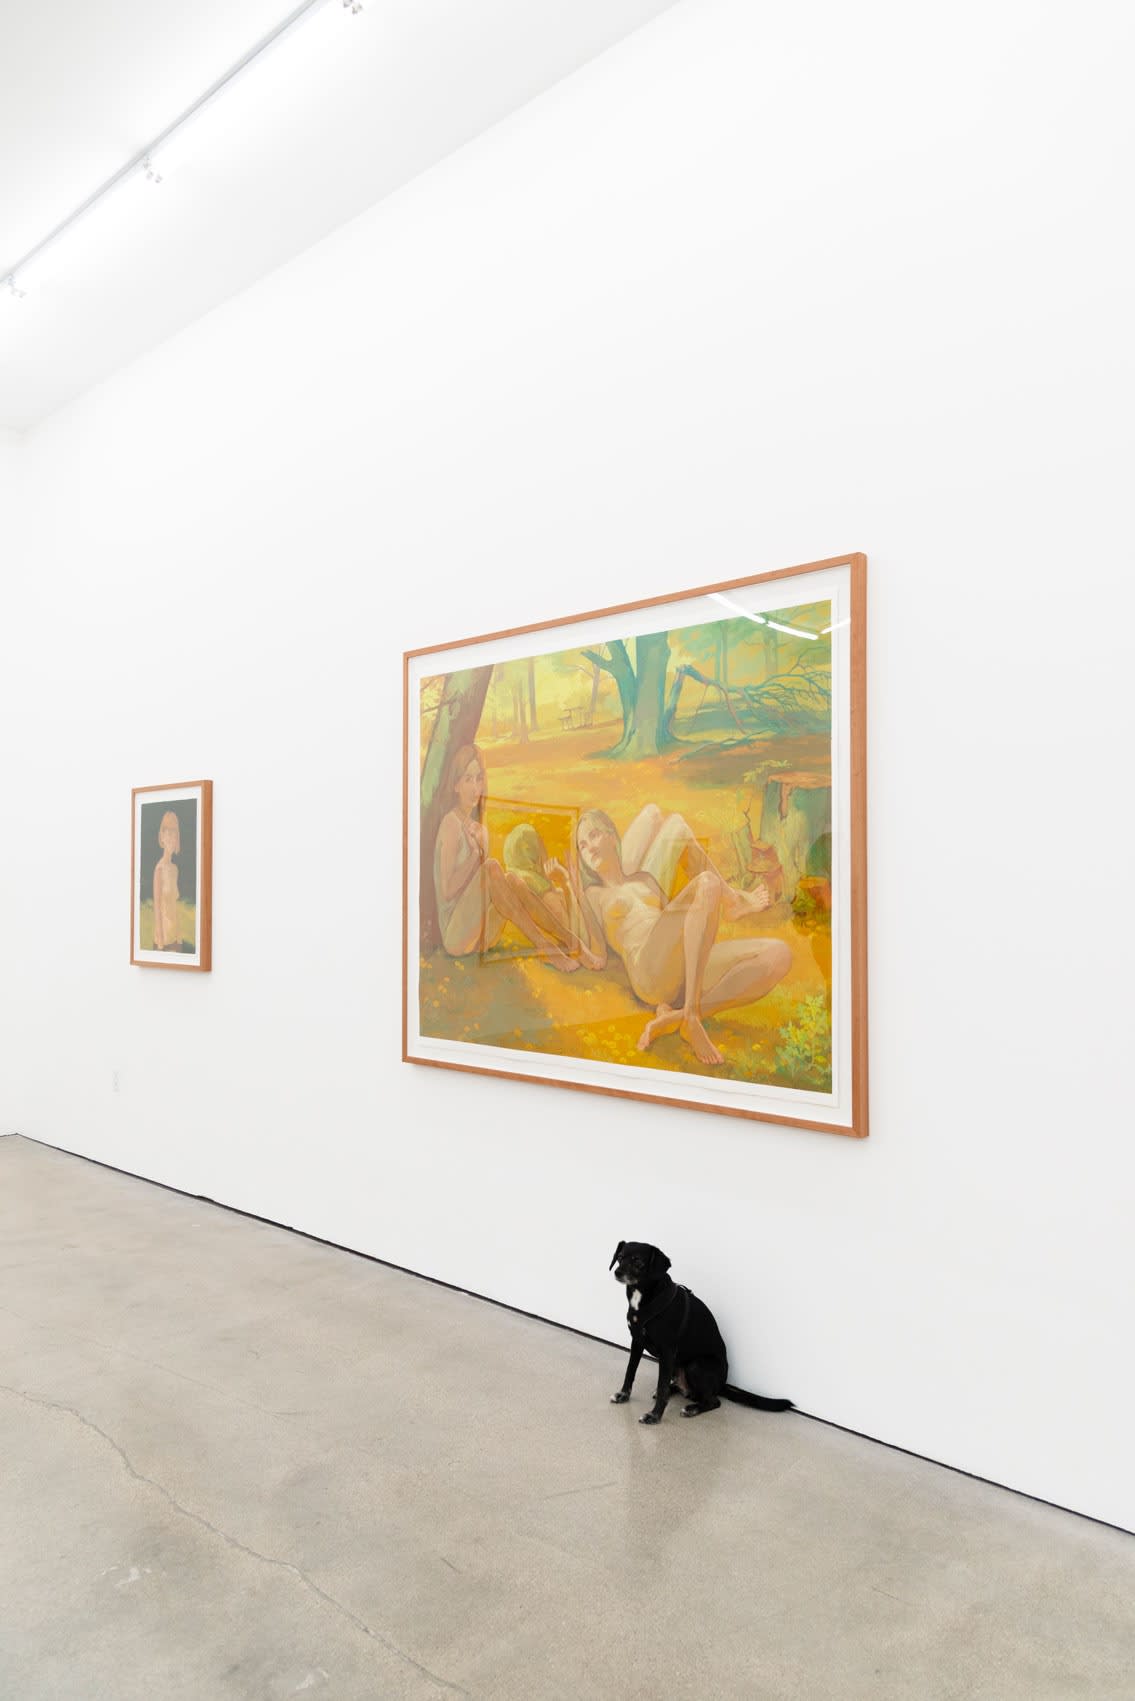 Meera, a small nervous black dog, sits on a concrete floor inside an art gallery with Rachel Gregor's framed paintings of evil teenage girls above her. 